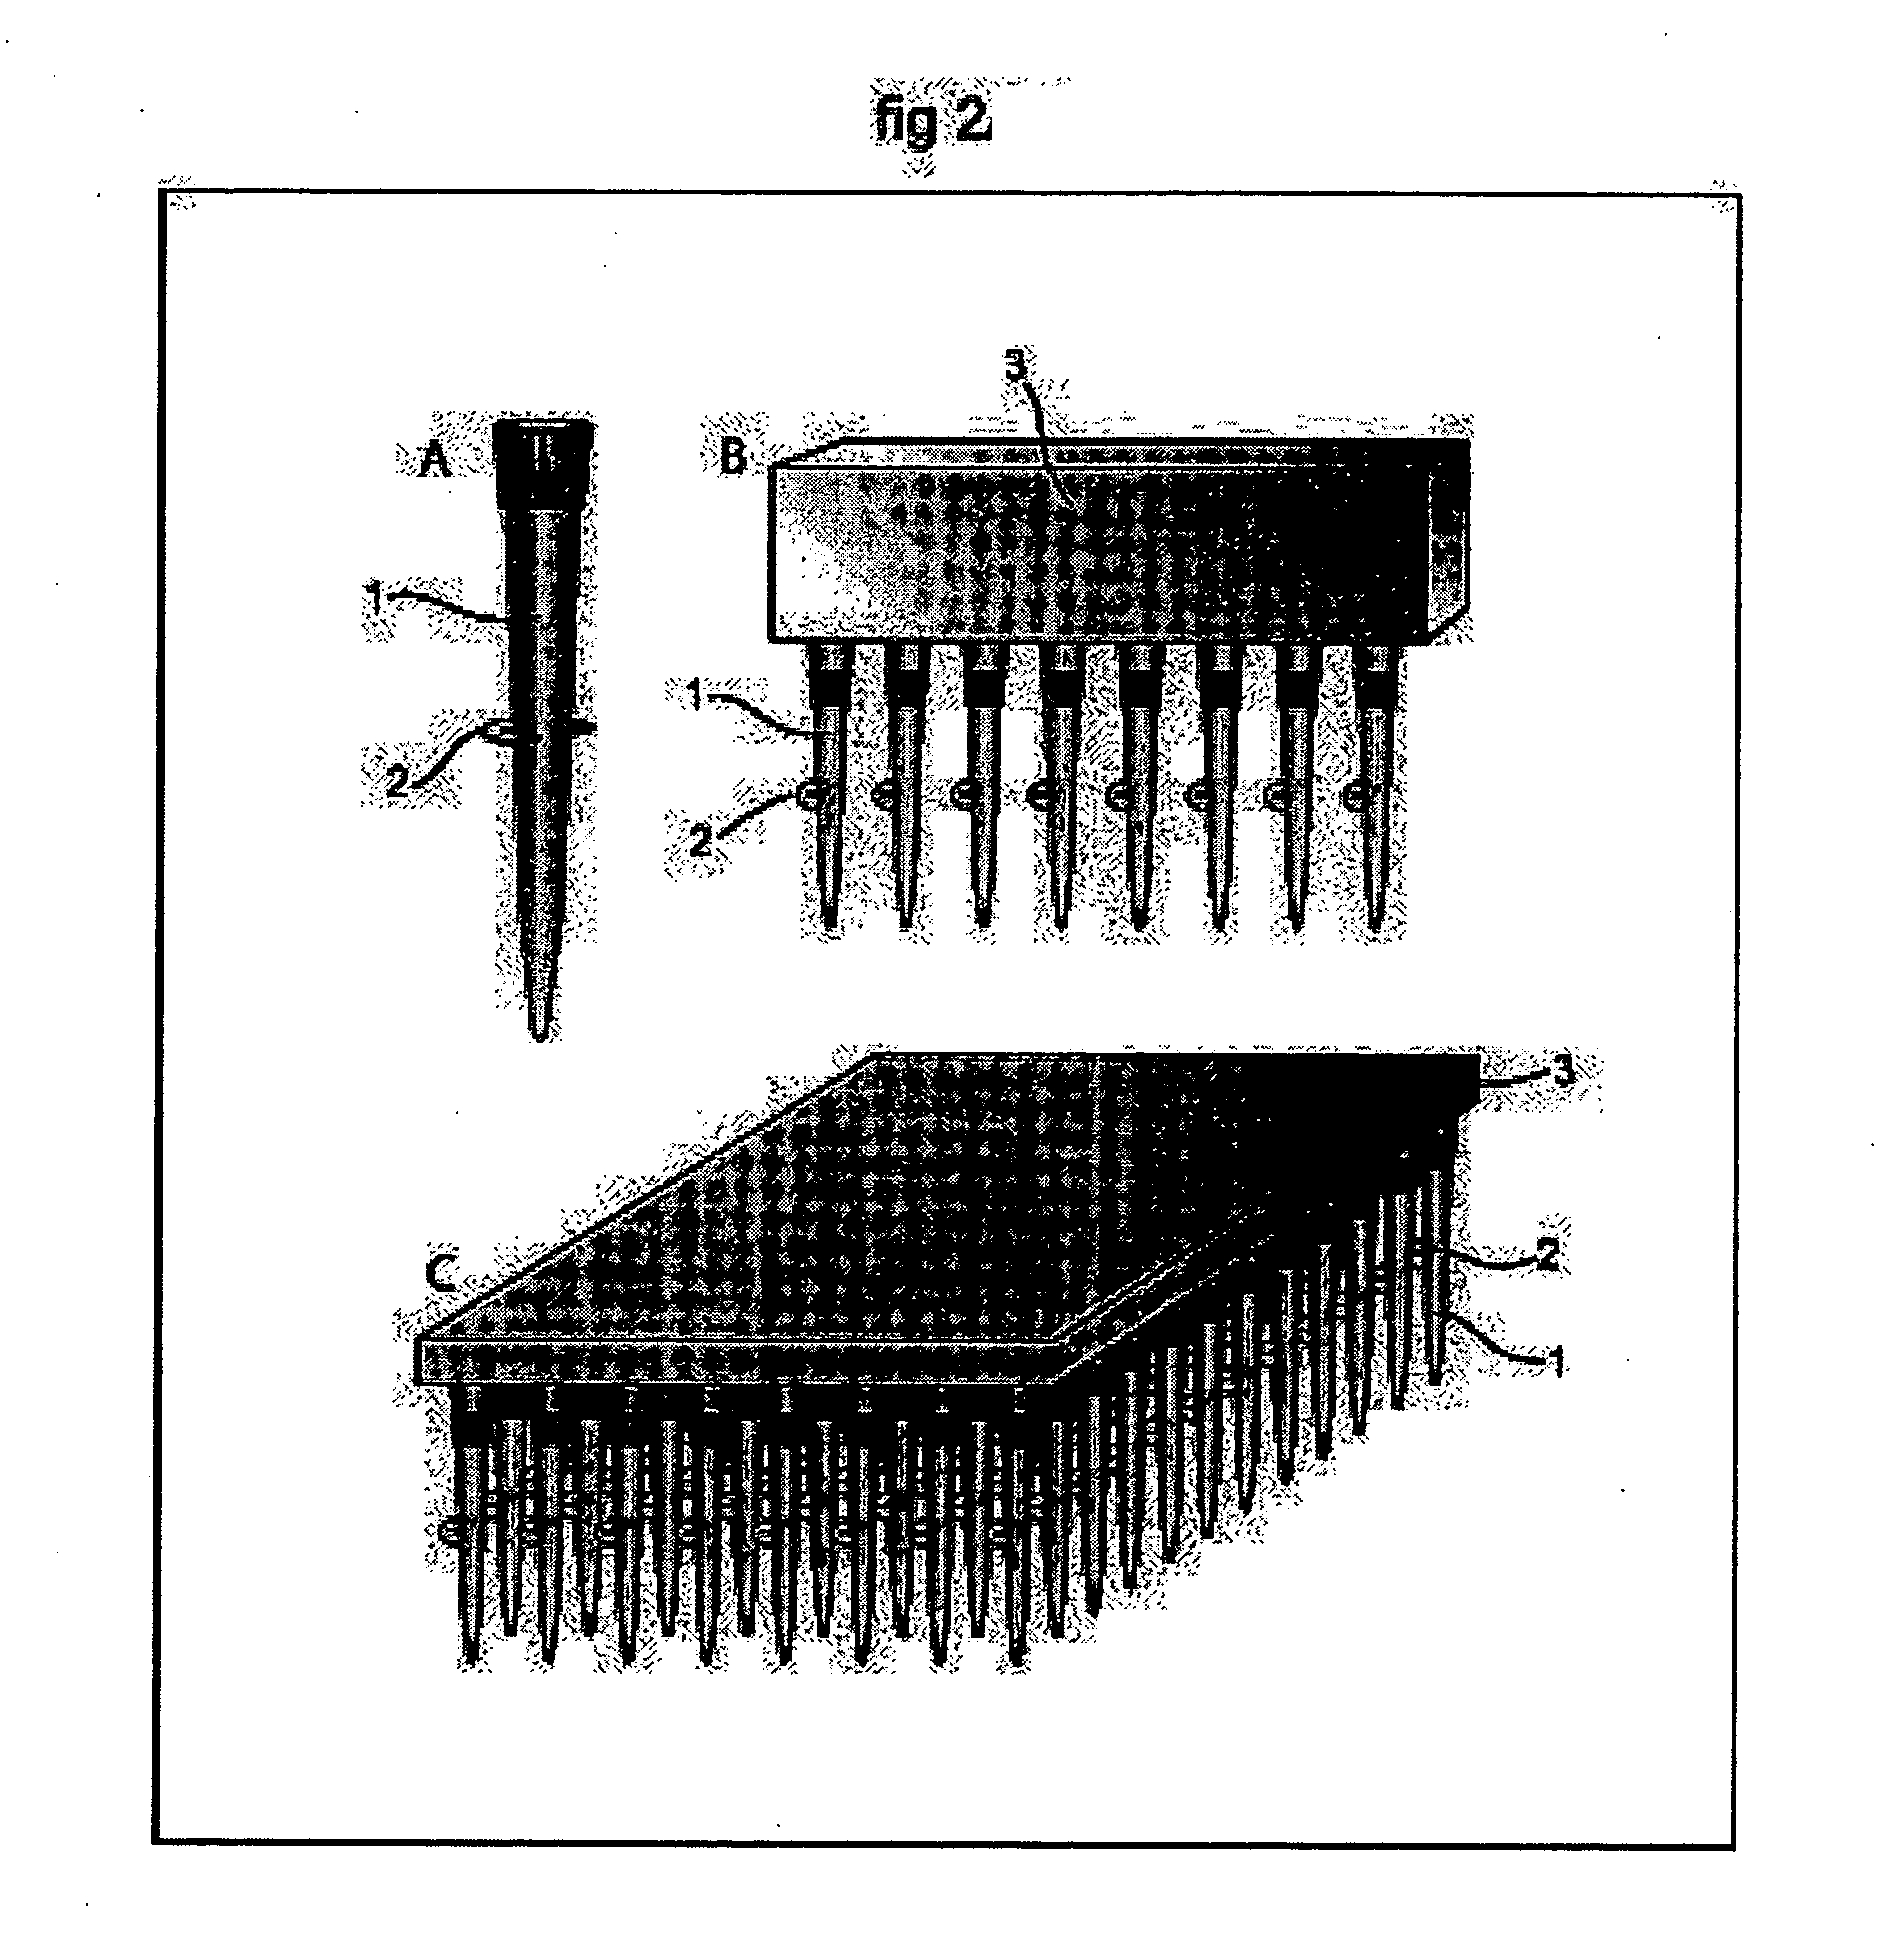 Method and apparatus for spatially confined electroporation